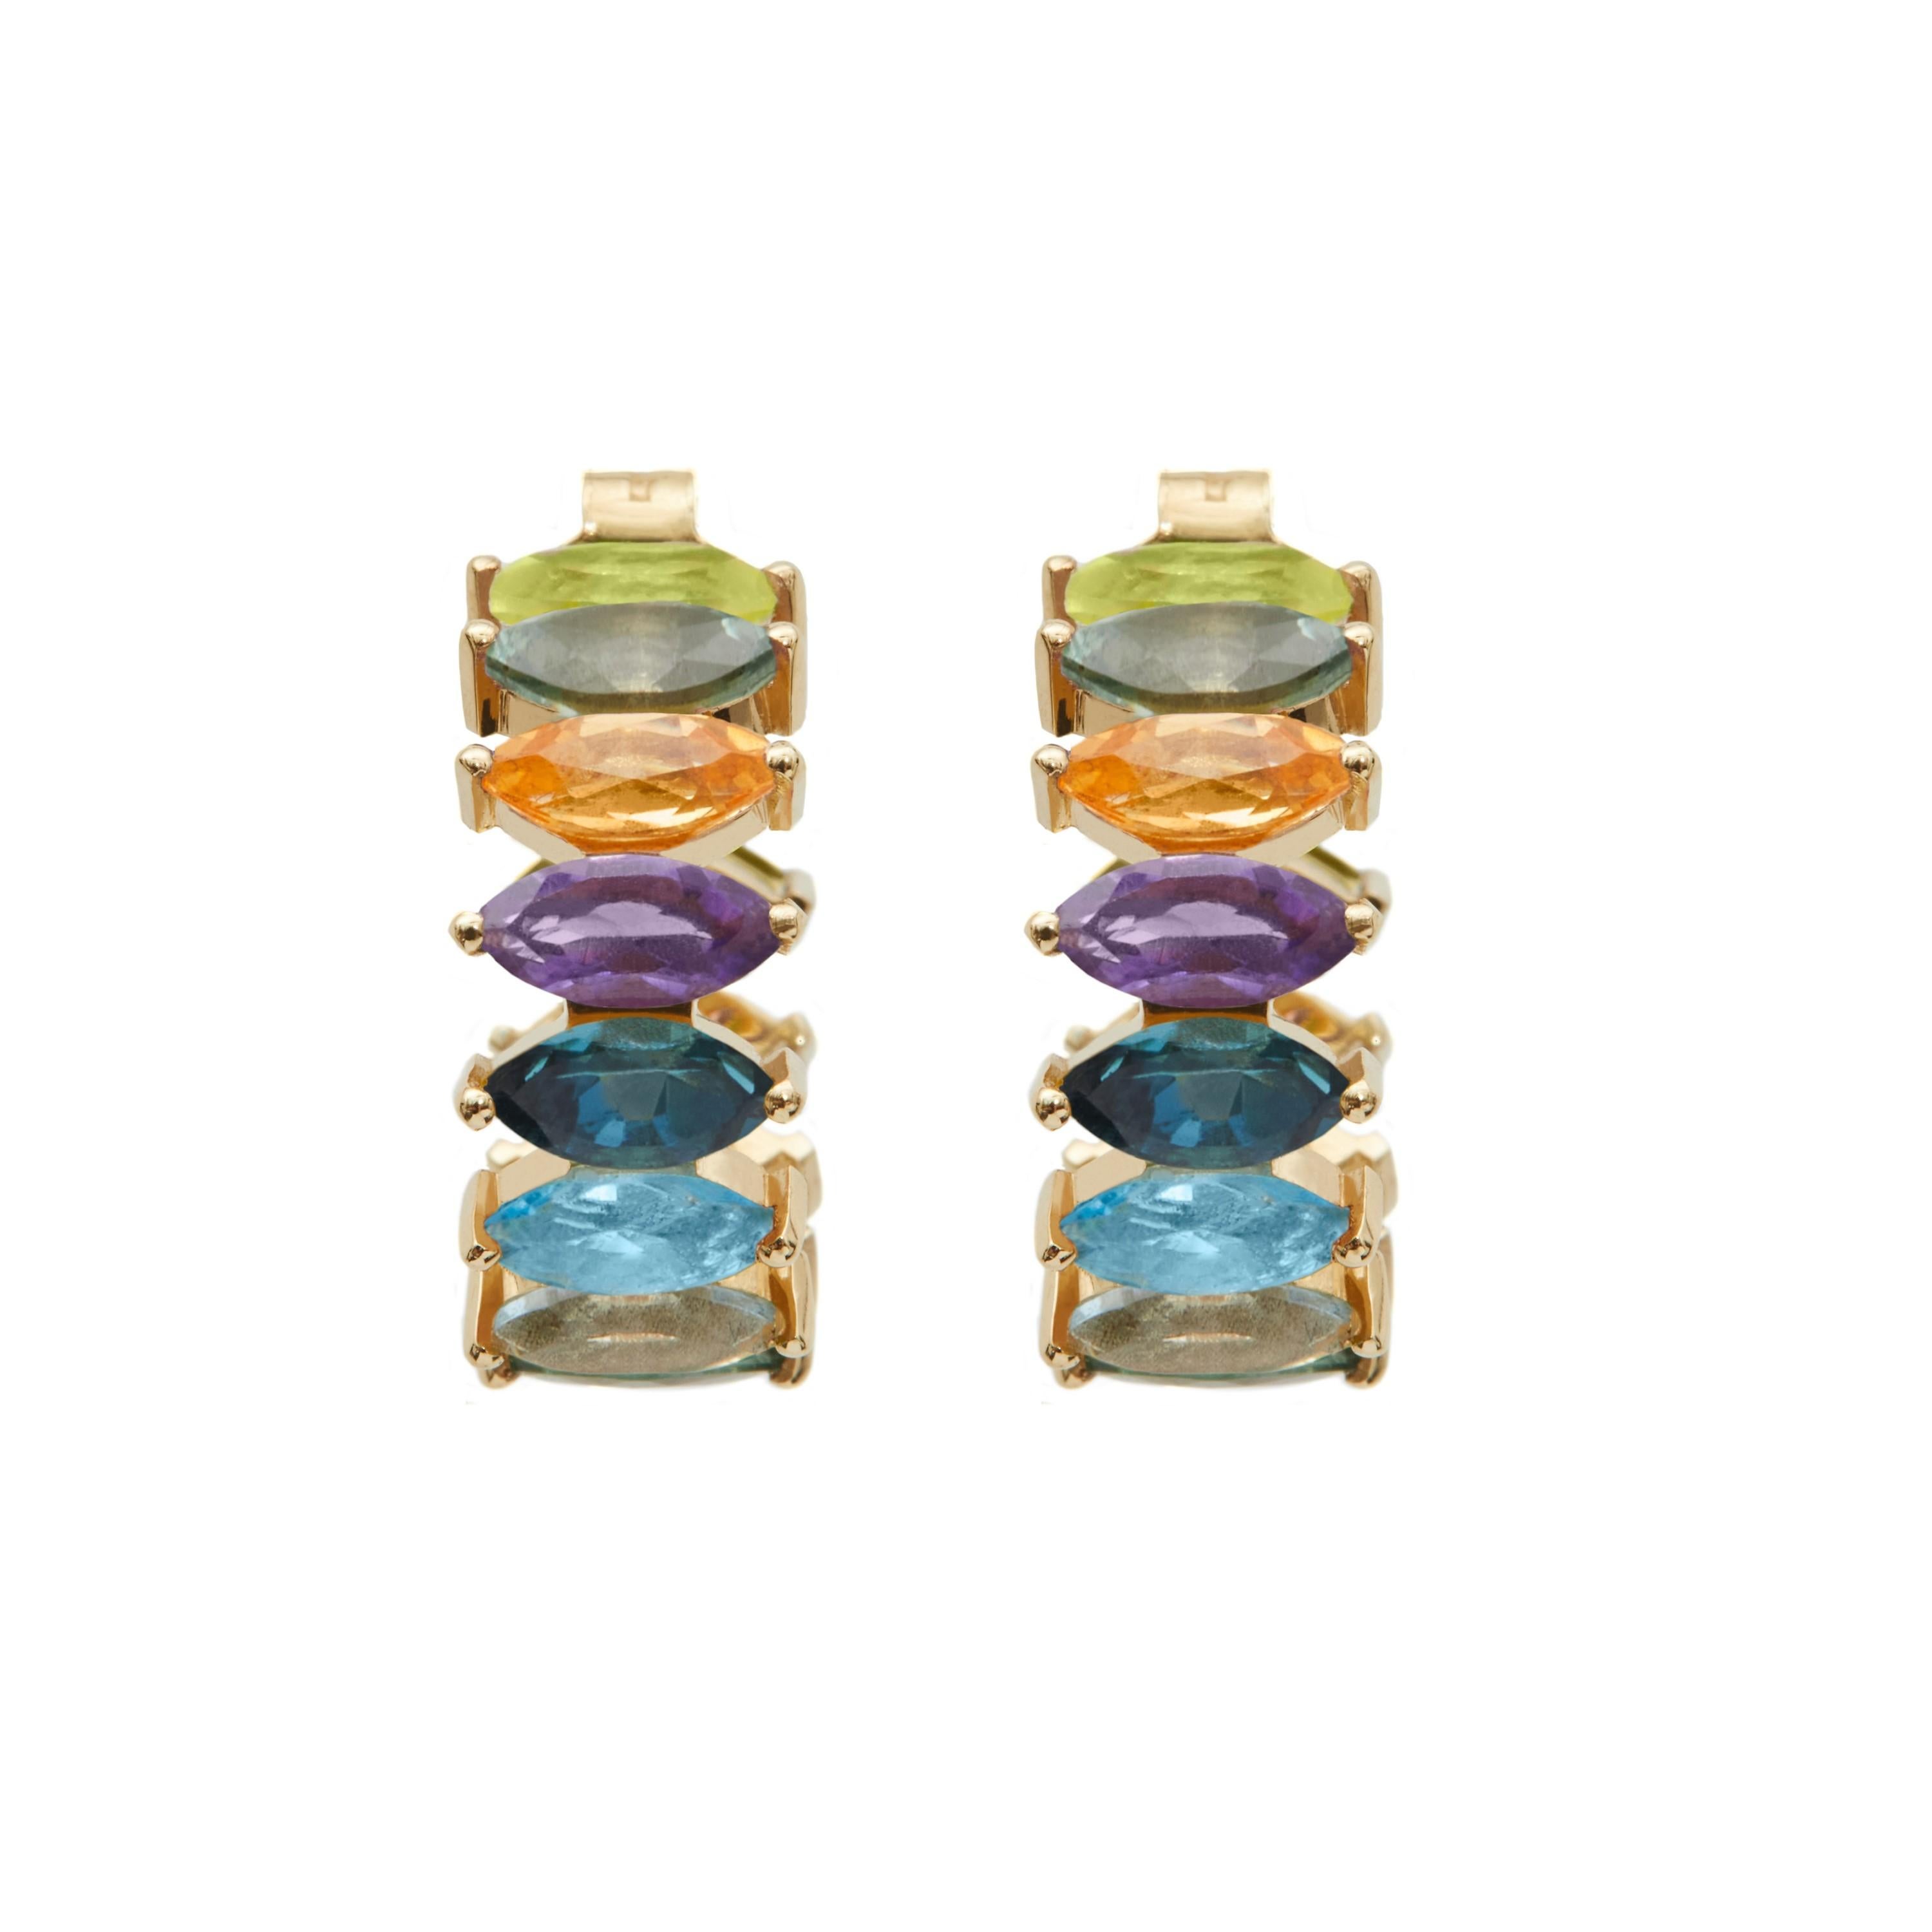 Made in 18k yellow gold, the vibrant mosaic hoop earrings are dazzling in marquise gemstones, making it an easy pop to any outfit. These earrings are sold as a pair. 